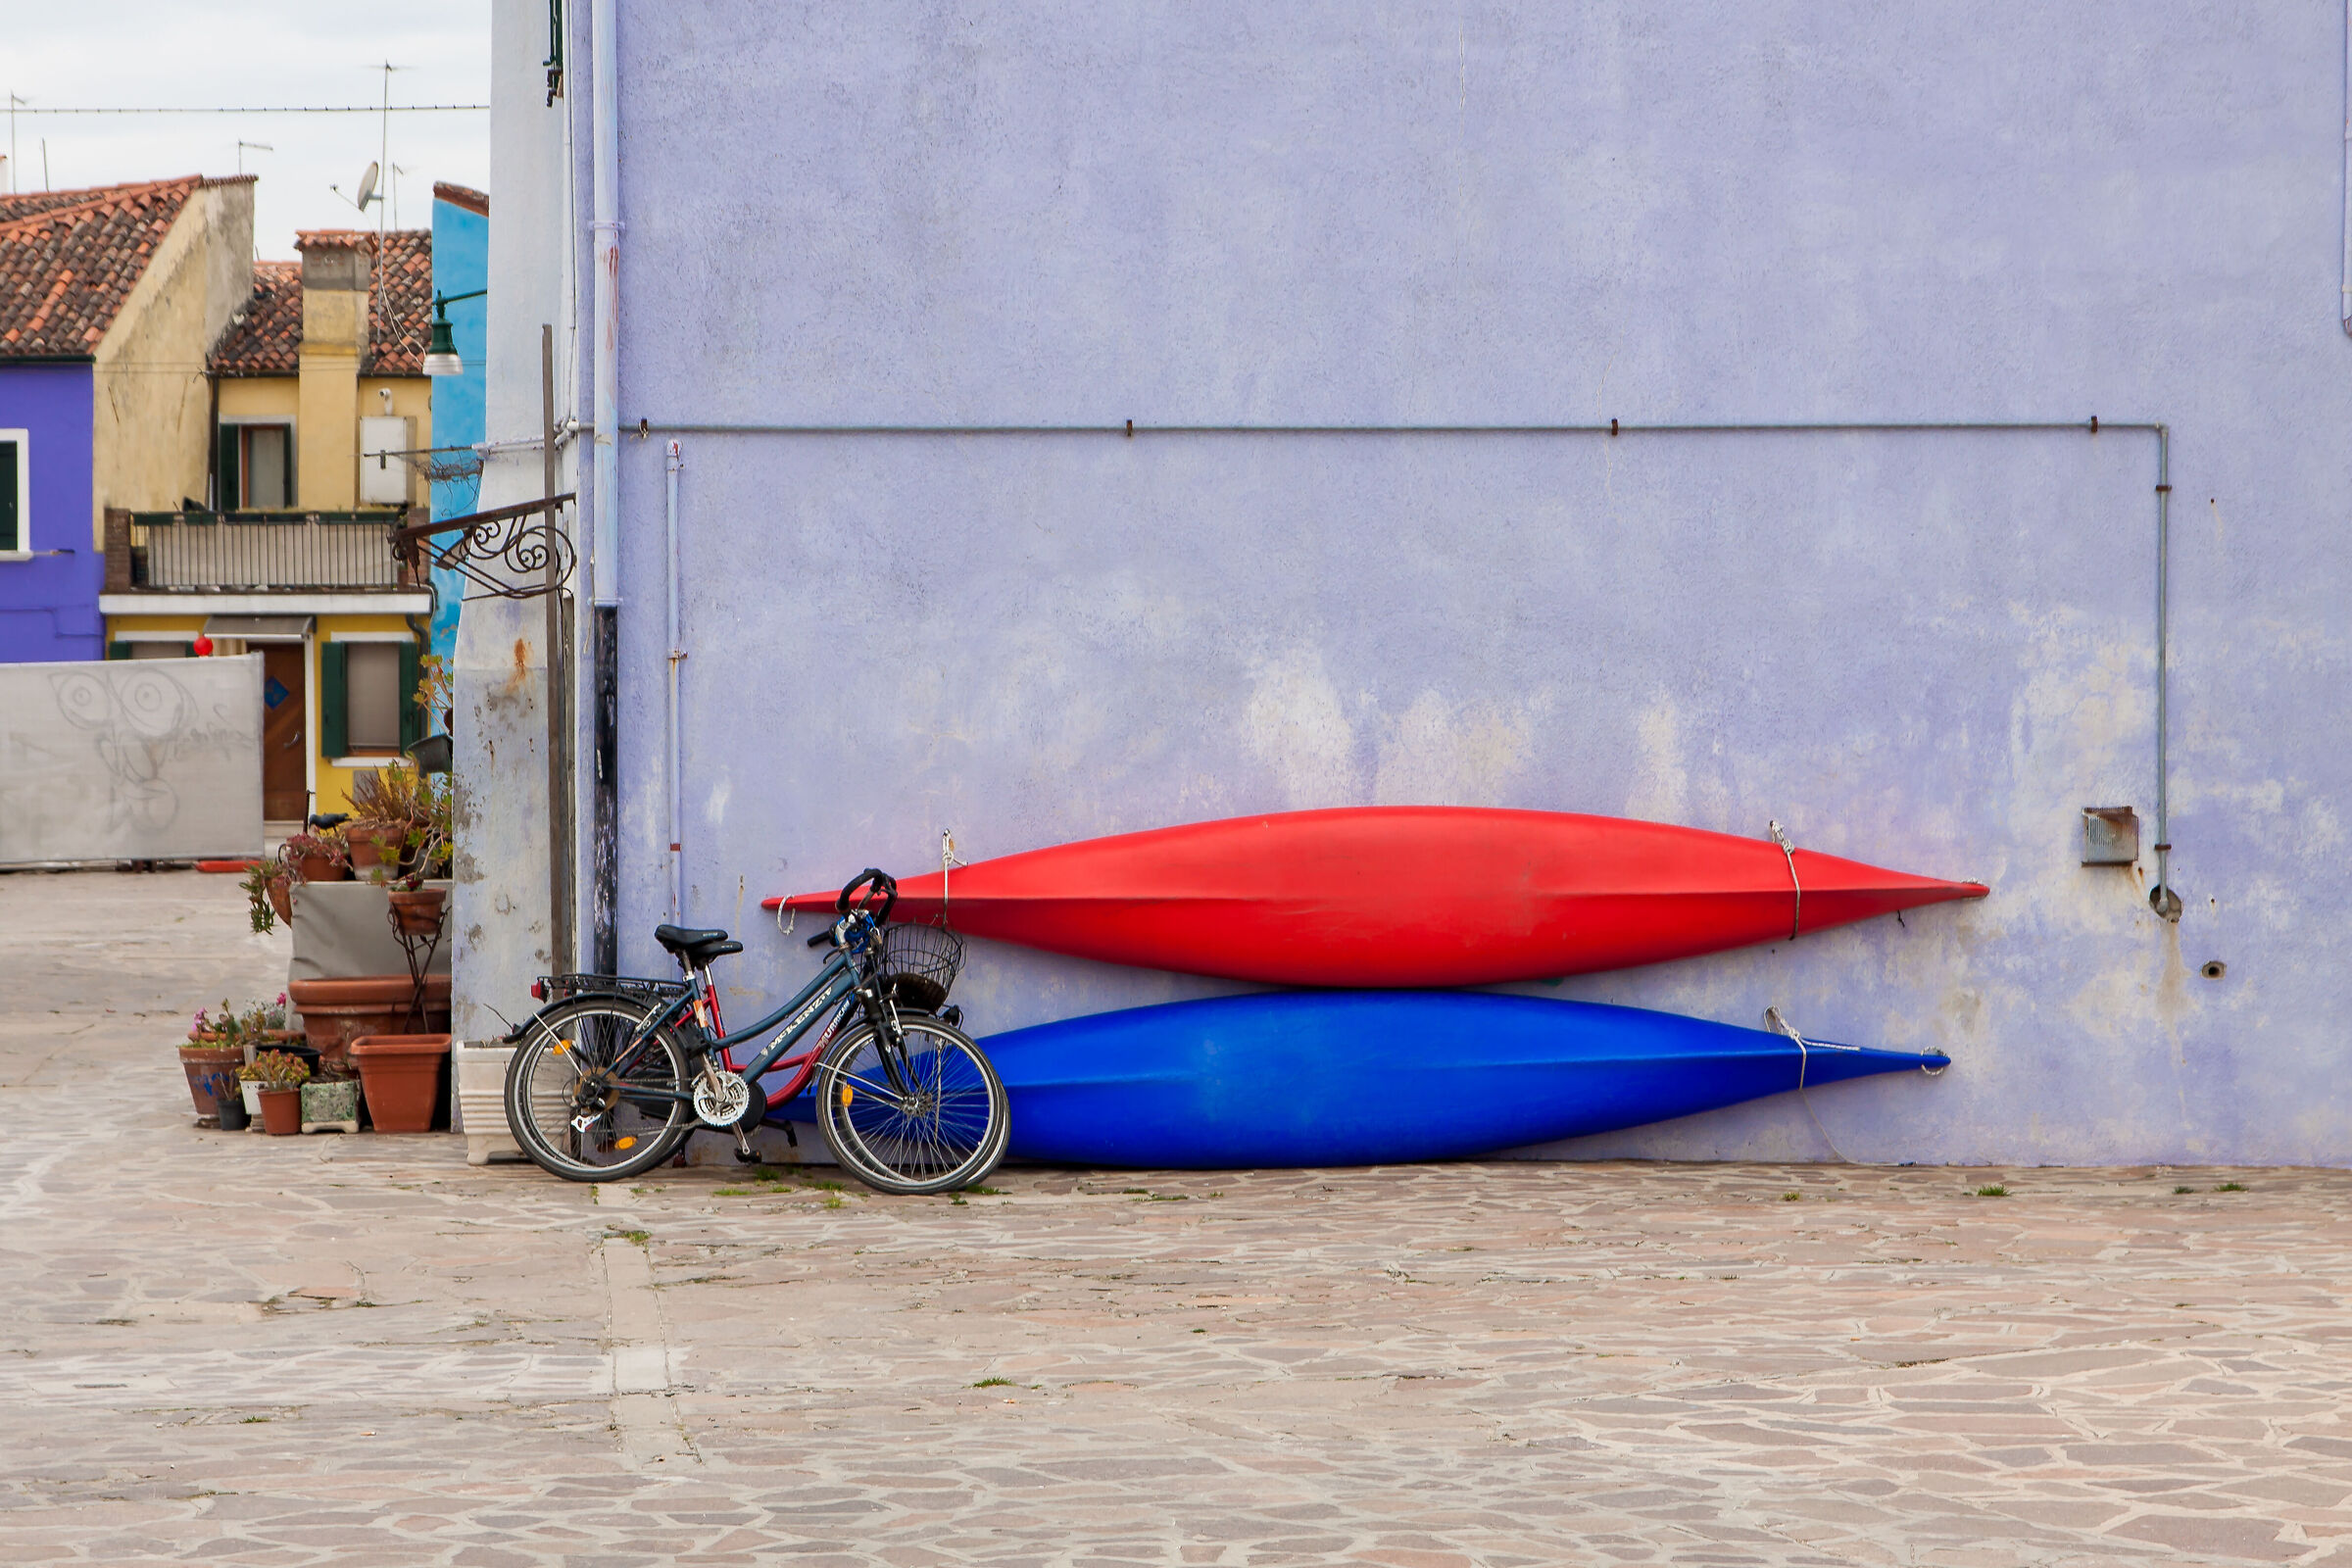 Burano, the colors....